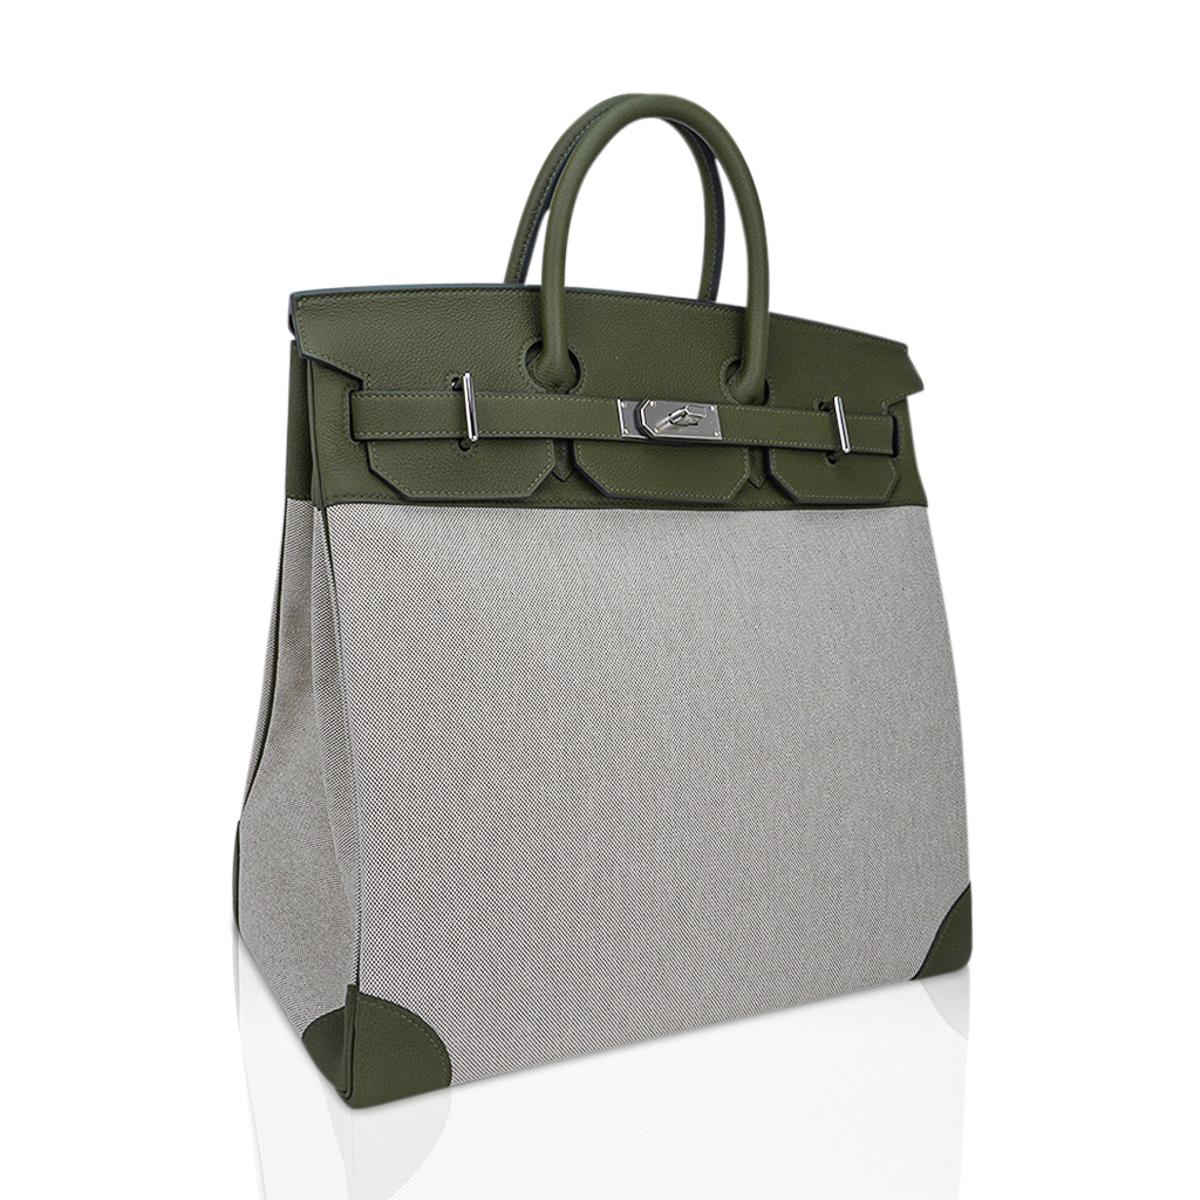 Mightychic offers a rare Hermes HAC 40 bag featured in Vert Veronese with Ecru and Vert Amande Criss Cross Toile.
A chic and masculine combination for this rare Hermes classic bag.
This beautiful saturated Vert Veronese Togo leather tote bag is